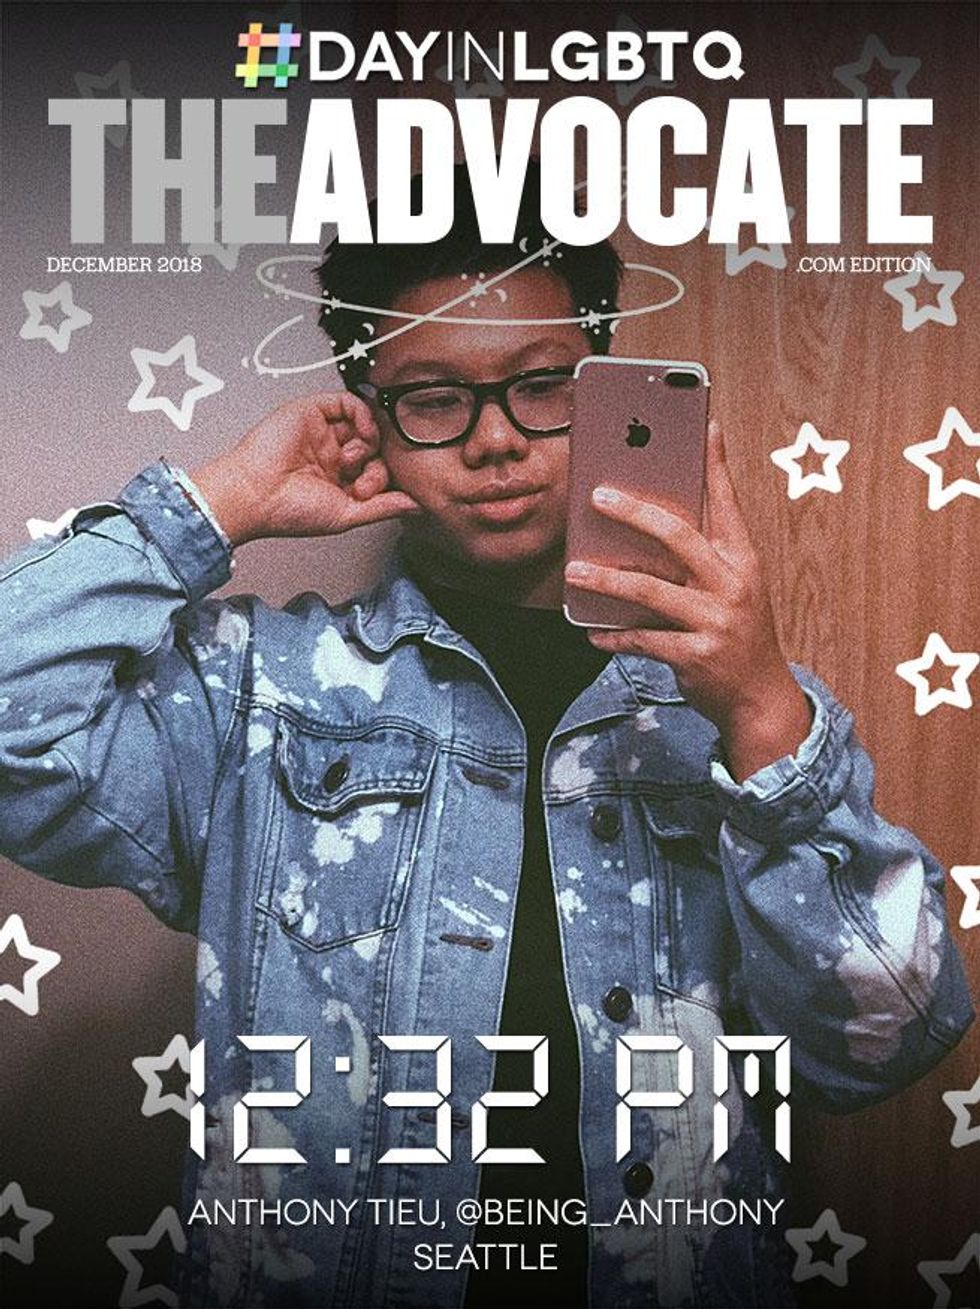 12-32-anthony-tieu-theadvocate-2018-dayinlgbt-cover-template-655